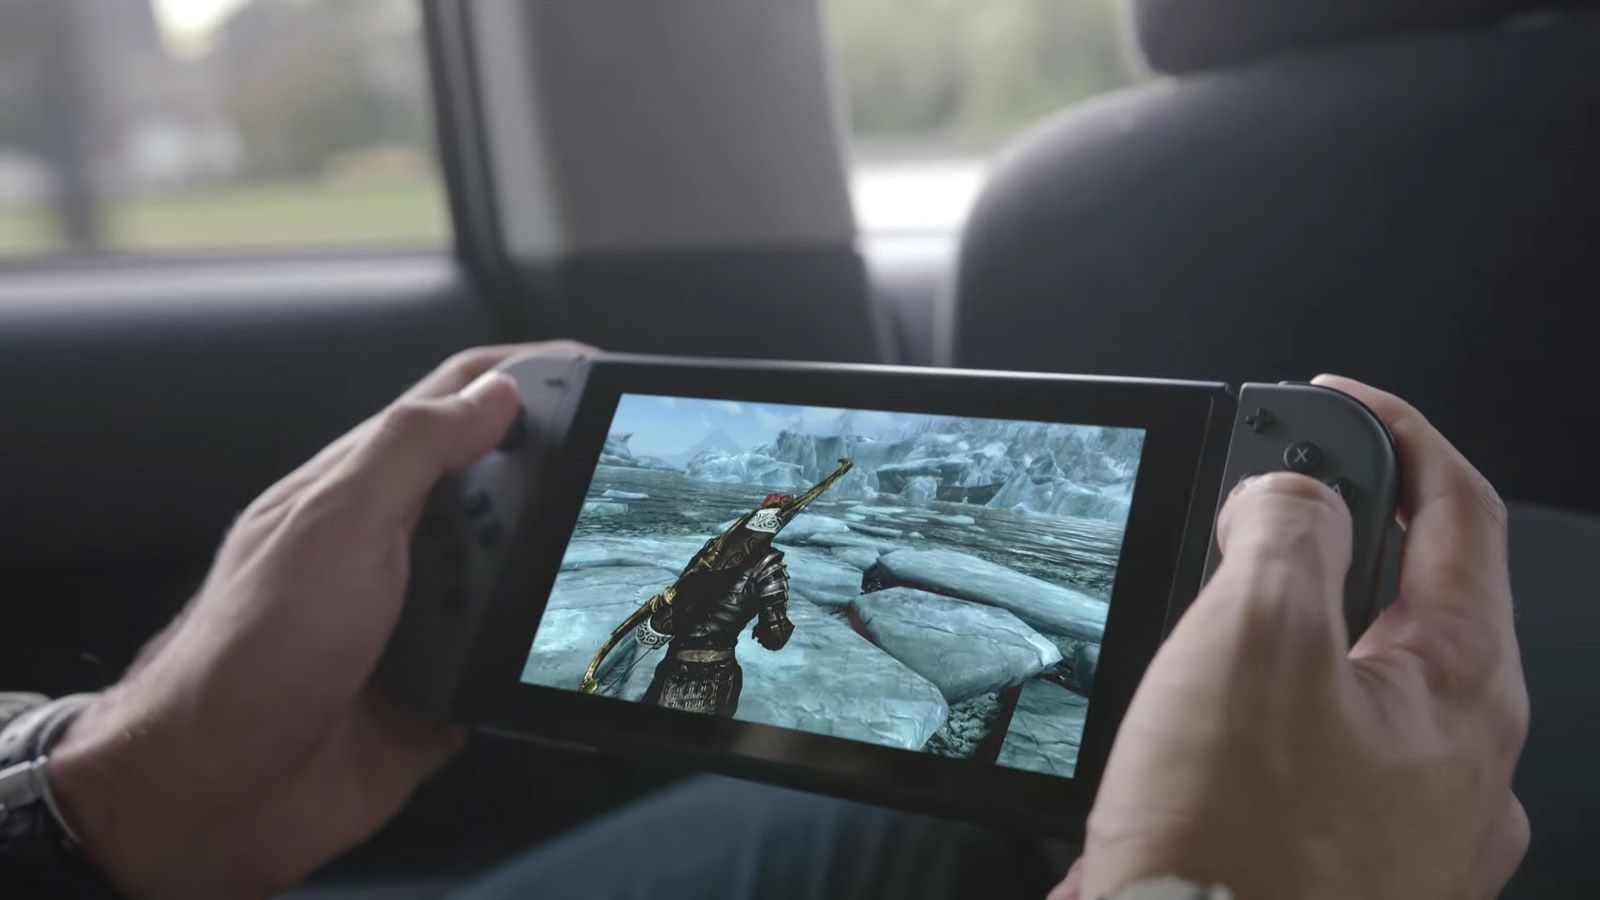 nintendo switch slated for 17 march release image 1